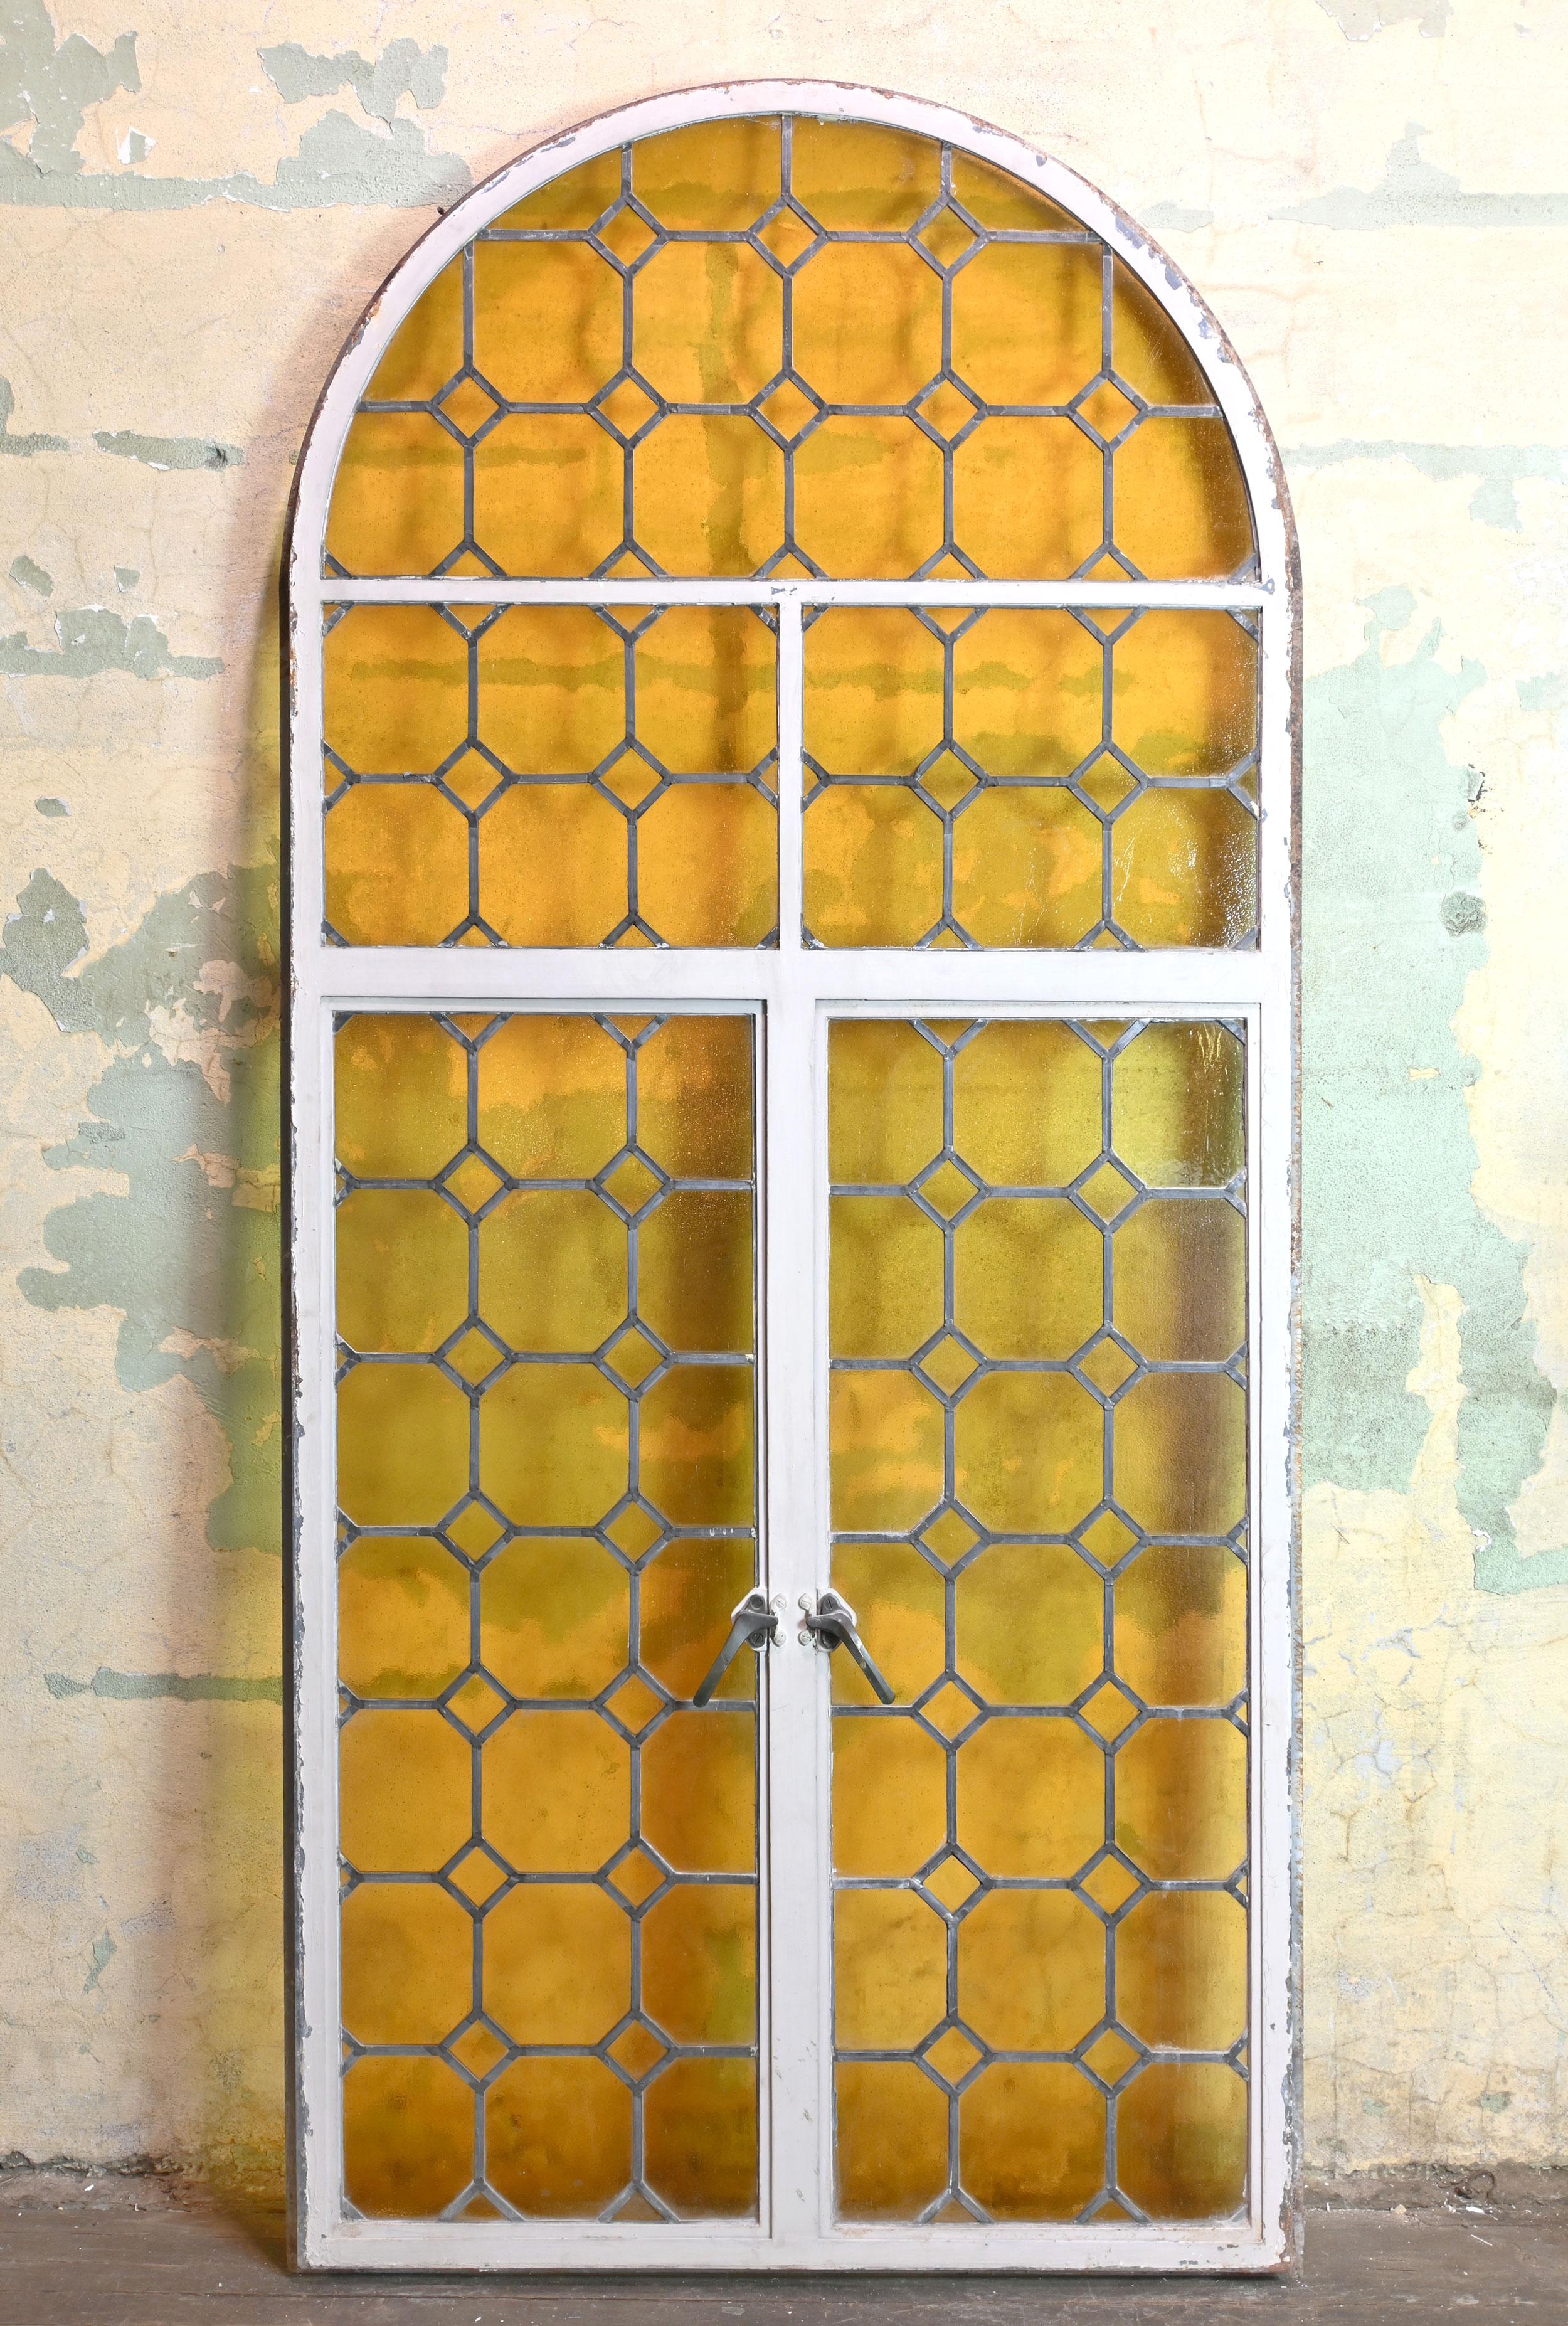 5 Original 1910’s style available
6 Reproduction 1950’s style available

AA# 49891

Circa: Salvaged from a 1912 High school with a late 1950’s renovation
Condition: Age Consistent
Material: Yellow Stained glass
Finish: Original
Origin: